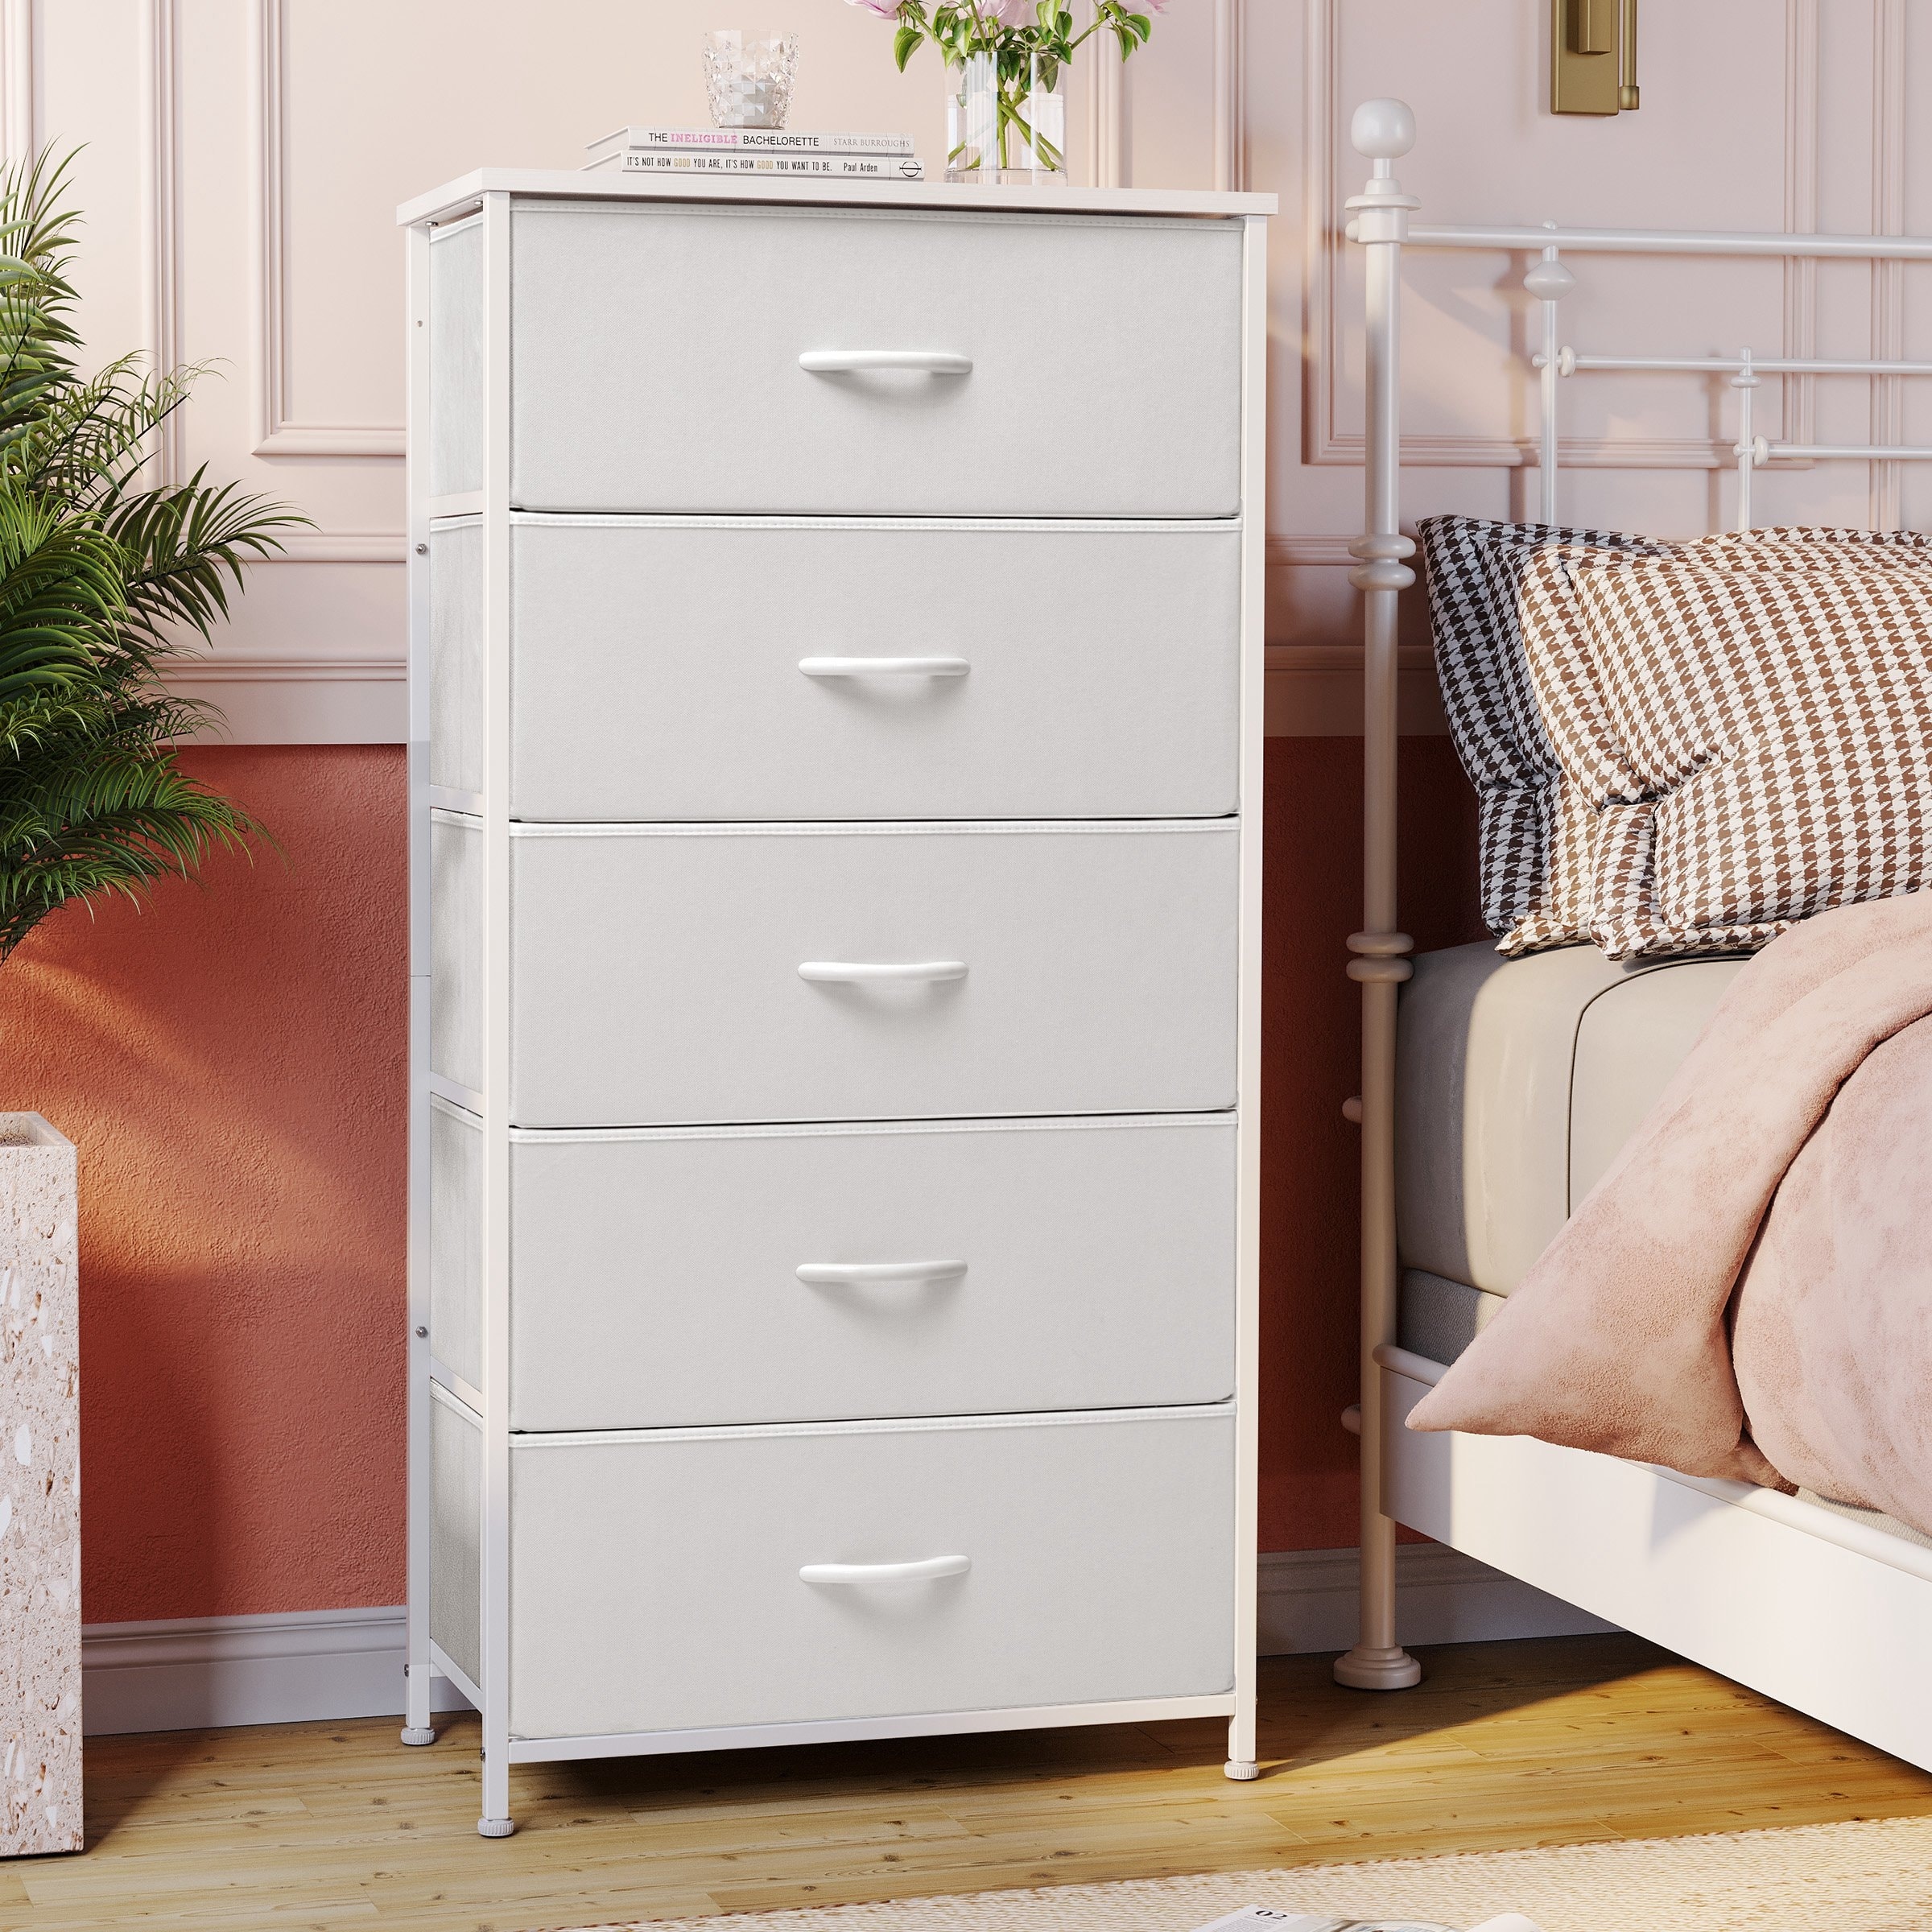 https://ak1.ostkcdn.com/images/products/is/images/direct/9a5494e46a9d863693ff3b8774e8171772749145/5-Drawers-Vertical-Dresser-Storage-Tower-Organizer-Unit-for-Bedroom.jpg